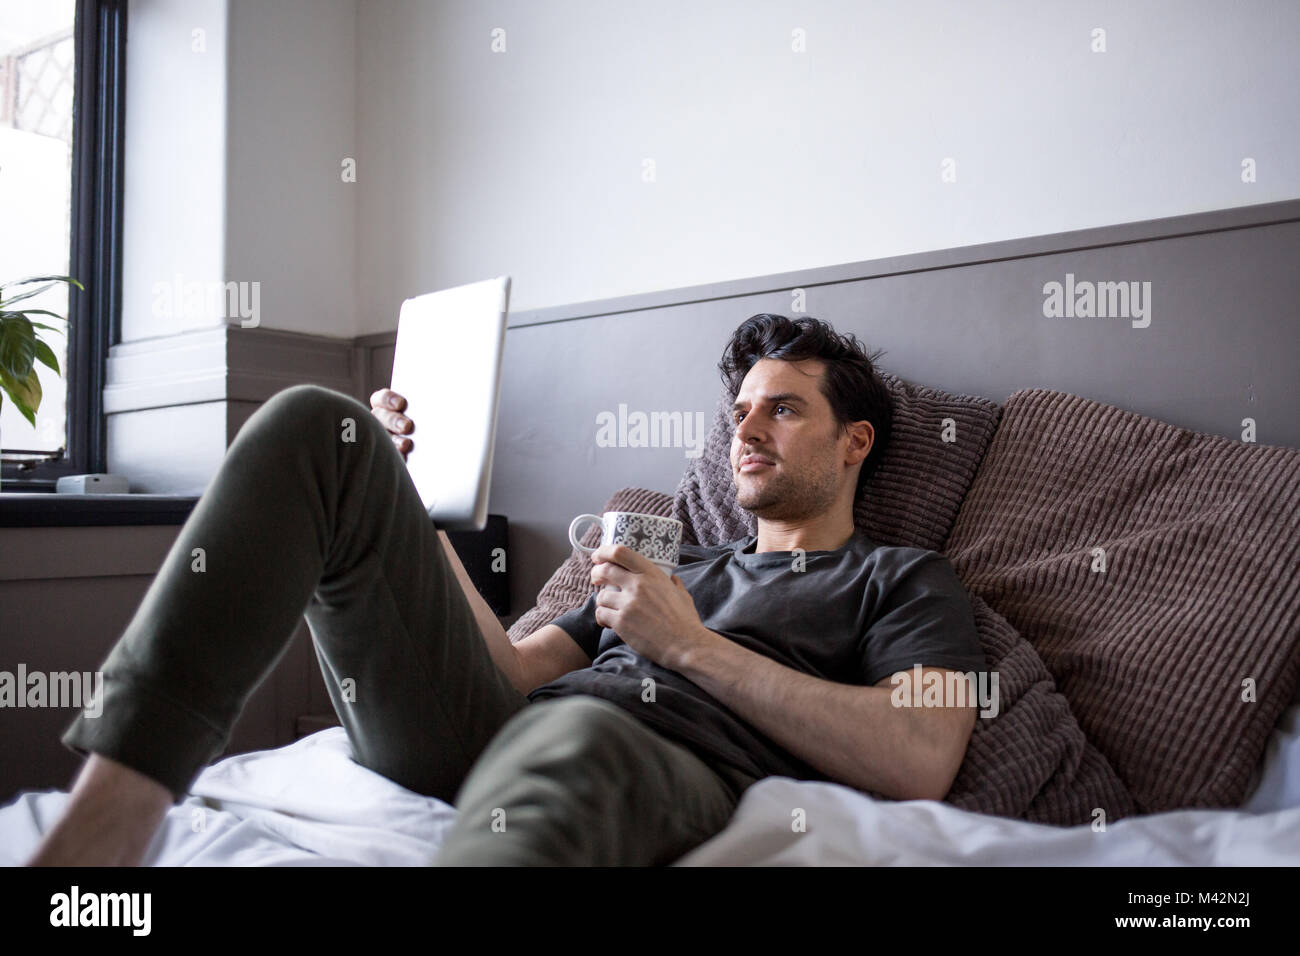 Young male reading on digital tablet Stock Photo